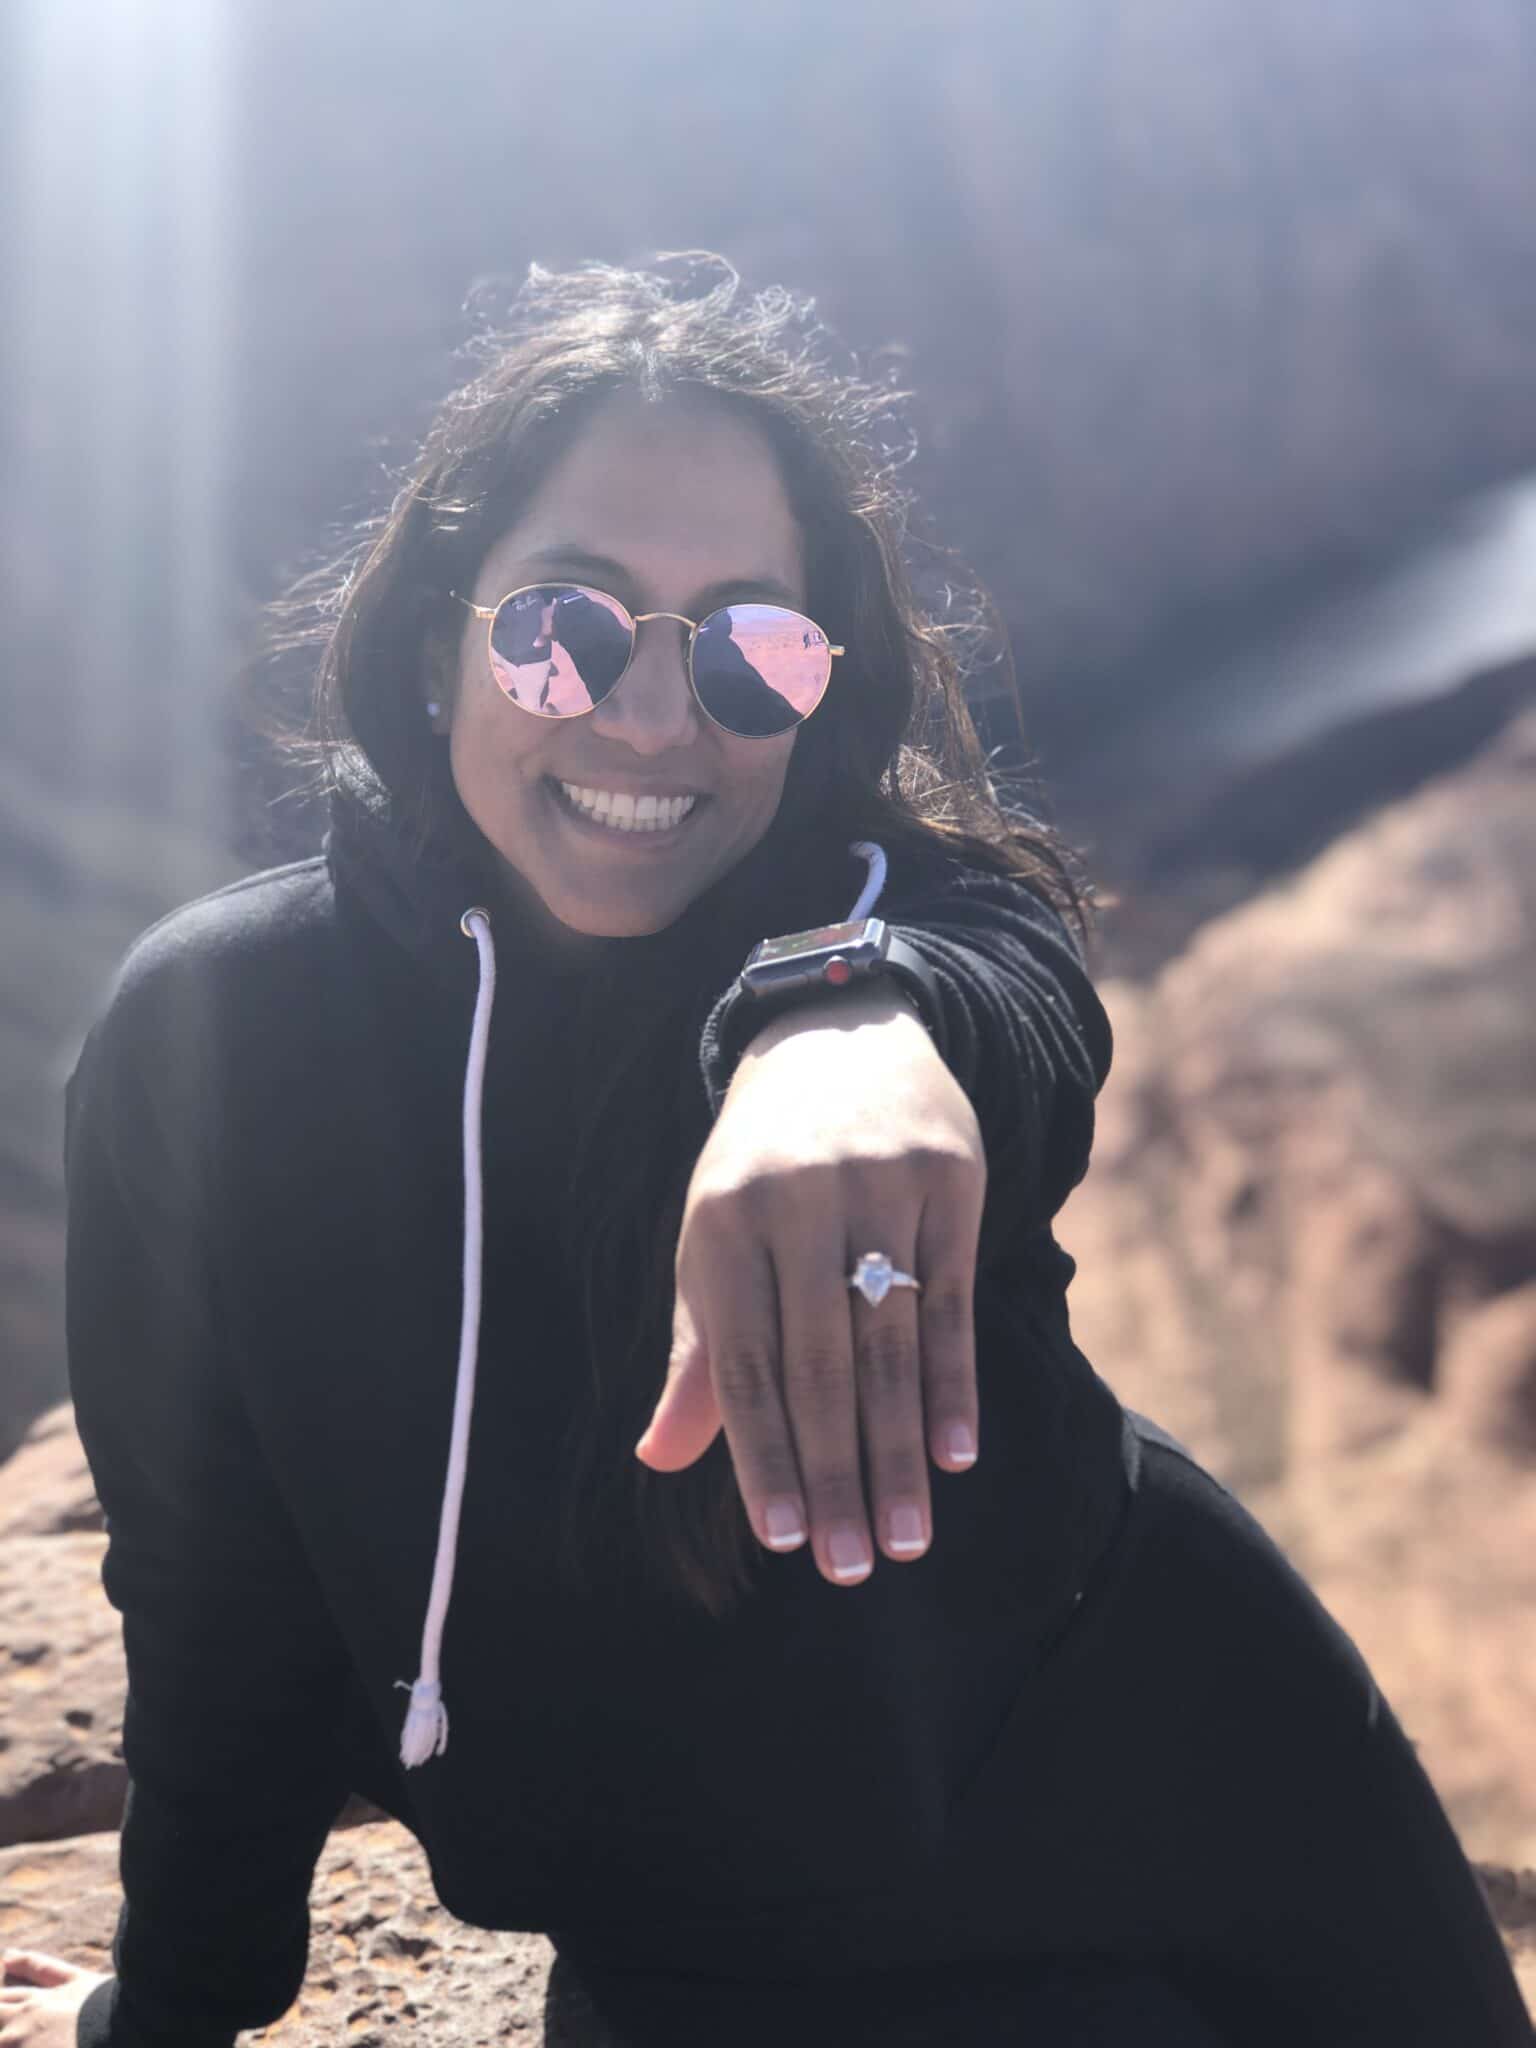 bride to be showing off her new engagement ring on her left hand after the horseshoe bend marriage proposal